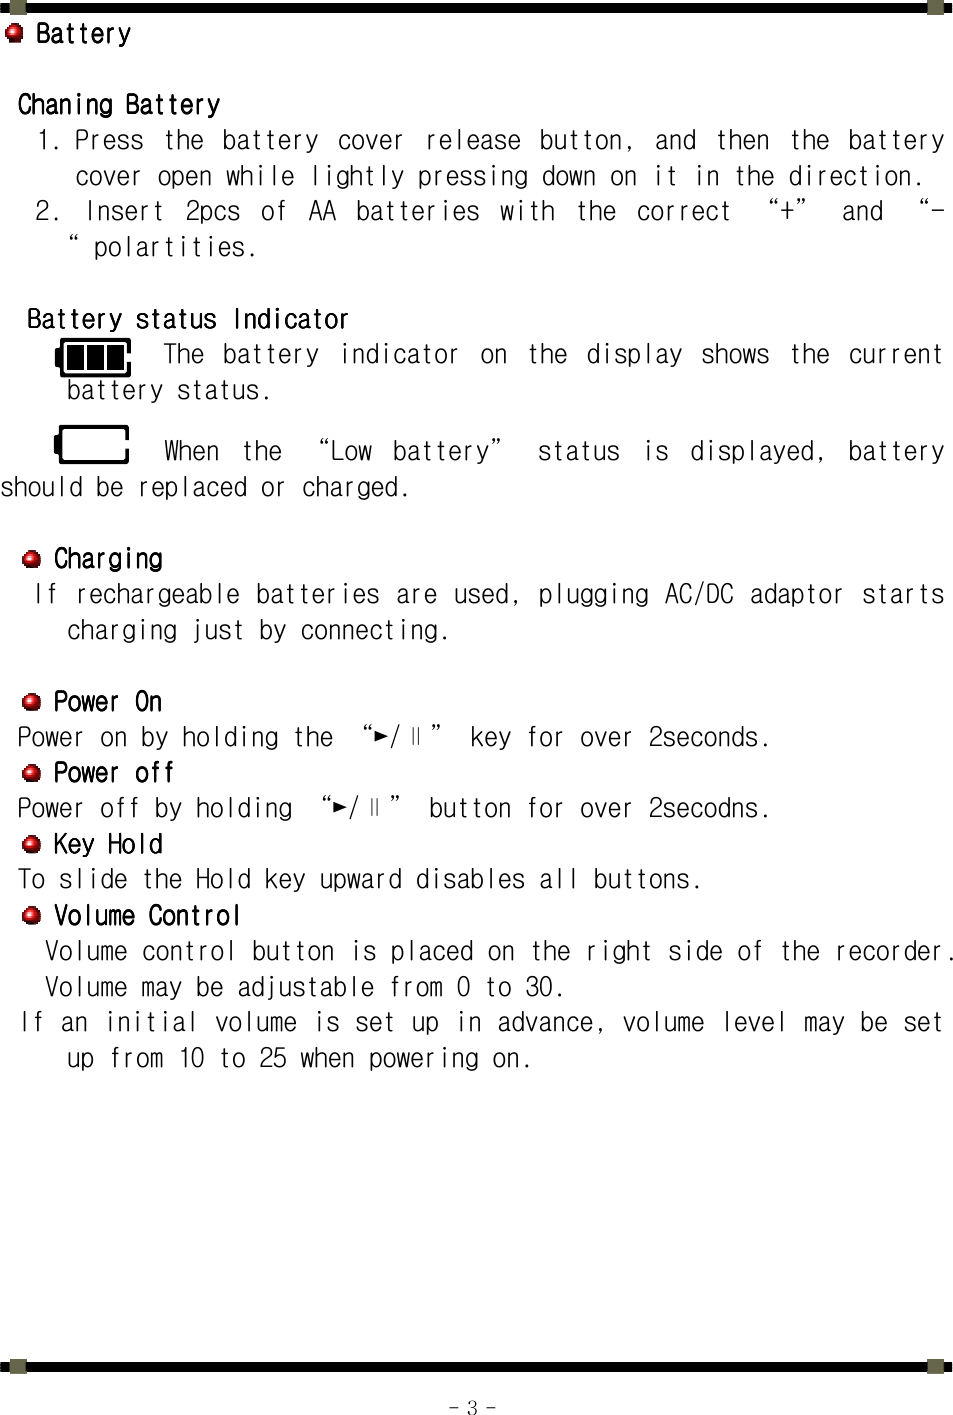      - 3 -     BatteryBatteryBatteryBattery        Chaning BatteryChaning BatteryChaning BatteryChaning Battery    1. Press  the  battery  cover  release  button,  and  then  the  battery cover open while lightly pressing down on it in the direction. 2.  Insert  2pcs  of  AA  batteries  with  the  correct  “+”  and  “-“ polartities.     Battery status IndicatorBattery status IndicatorBattery status IndicatorBattery status Indicator    The  battery  indicator  on  the  display  shows  the  current battery status.    When  the  “Low  battery”  status  is  displayed,  battery should be replaced or charged.      ChargingChargingChargingCharging     If rechargeable batteries are used, plugging AC/DC adaptor starts charging just by connecting.        Power OnPower OnPower OnPower On    Power on by holding the “►/∥” key for over 2seconds.     Power offPower offPower offPower off    Power off by holding “►/∥” button for over 2secodns.     Key HoldKey HoldKey HoldKey Hold    To slide the Hold key upward disables all buttons.     Volume ControlVolume ControlVolume ControlVolume Control    Volume control button is placed on the right side of the recorder. Volume may be adjustable from 0 to 30. If an initial volume is set up in advance, volume level may be set up from 10 to 25 when powering on.  